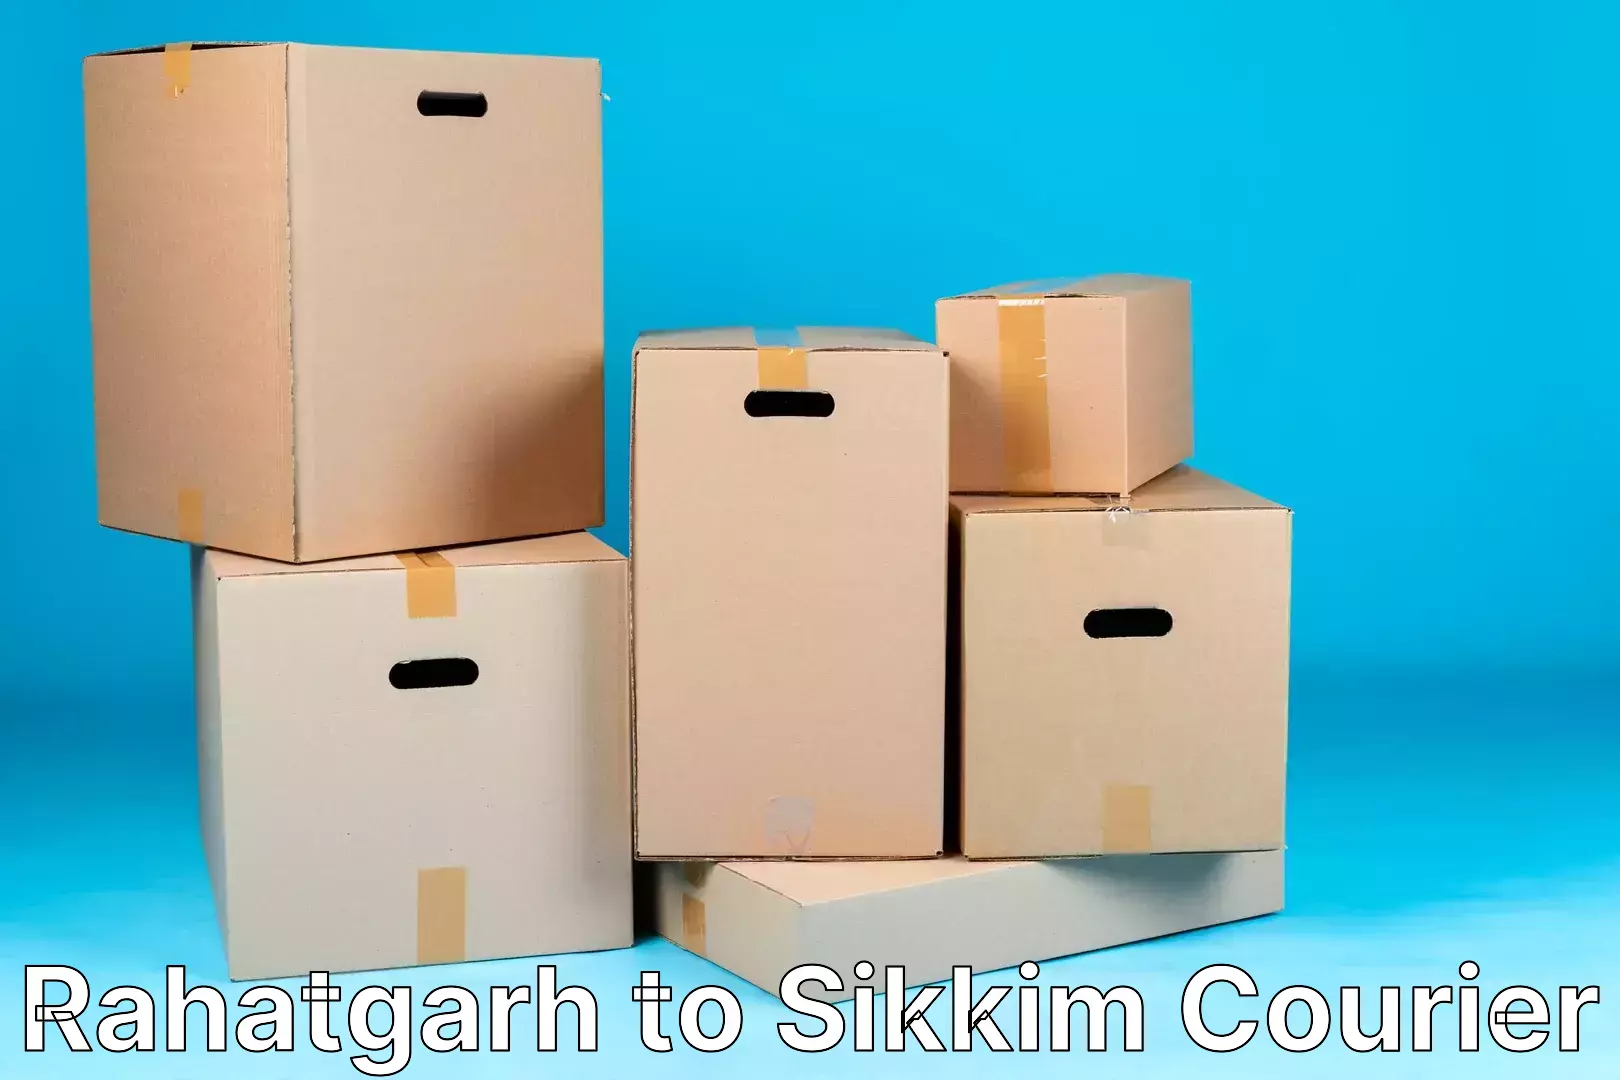 Multi-national courier services Rahatgarh to Sikkim